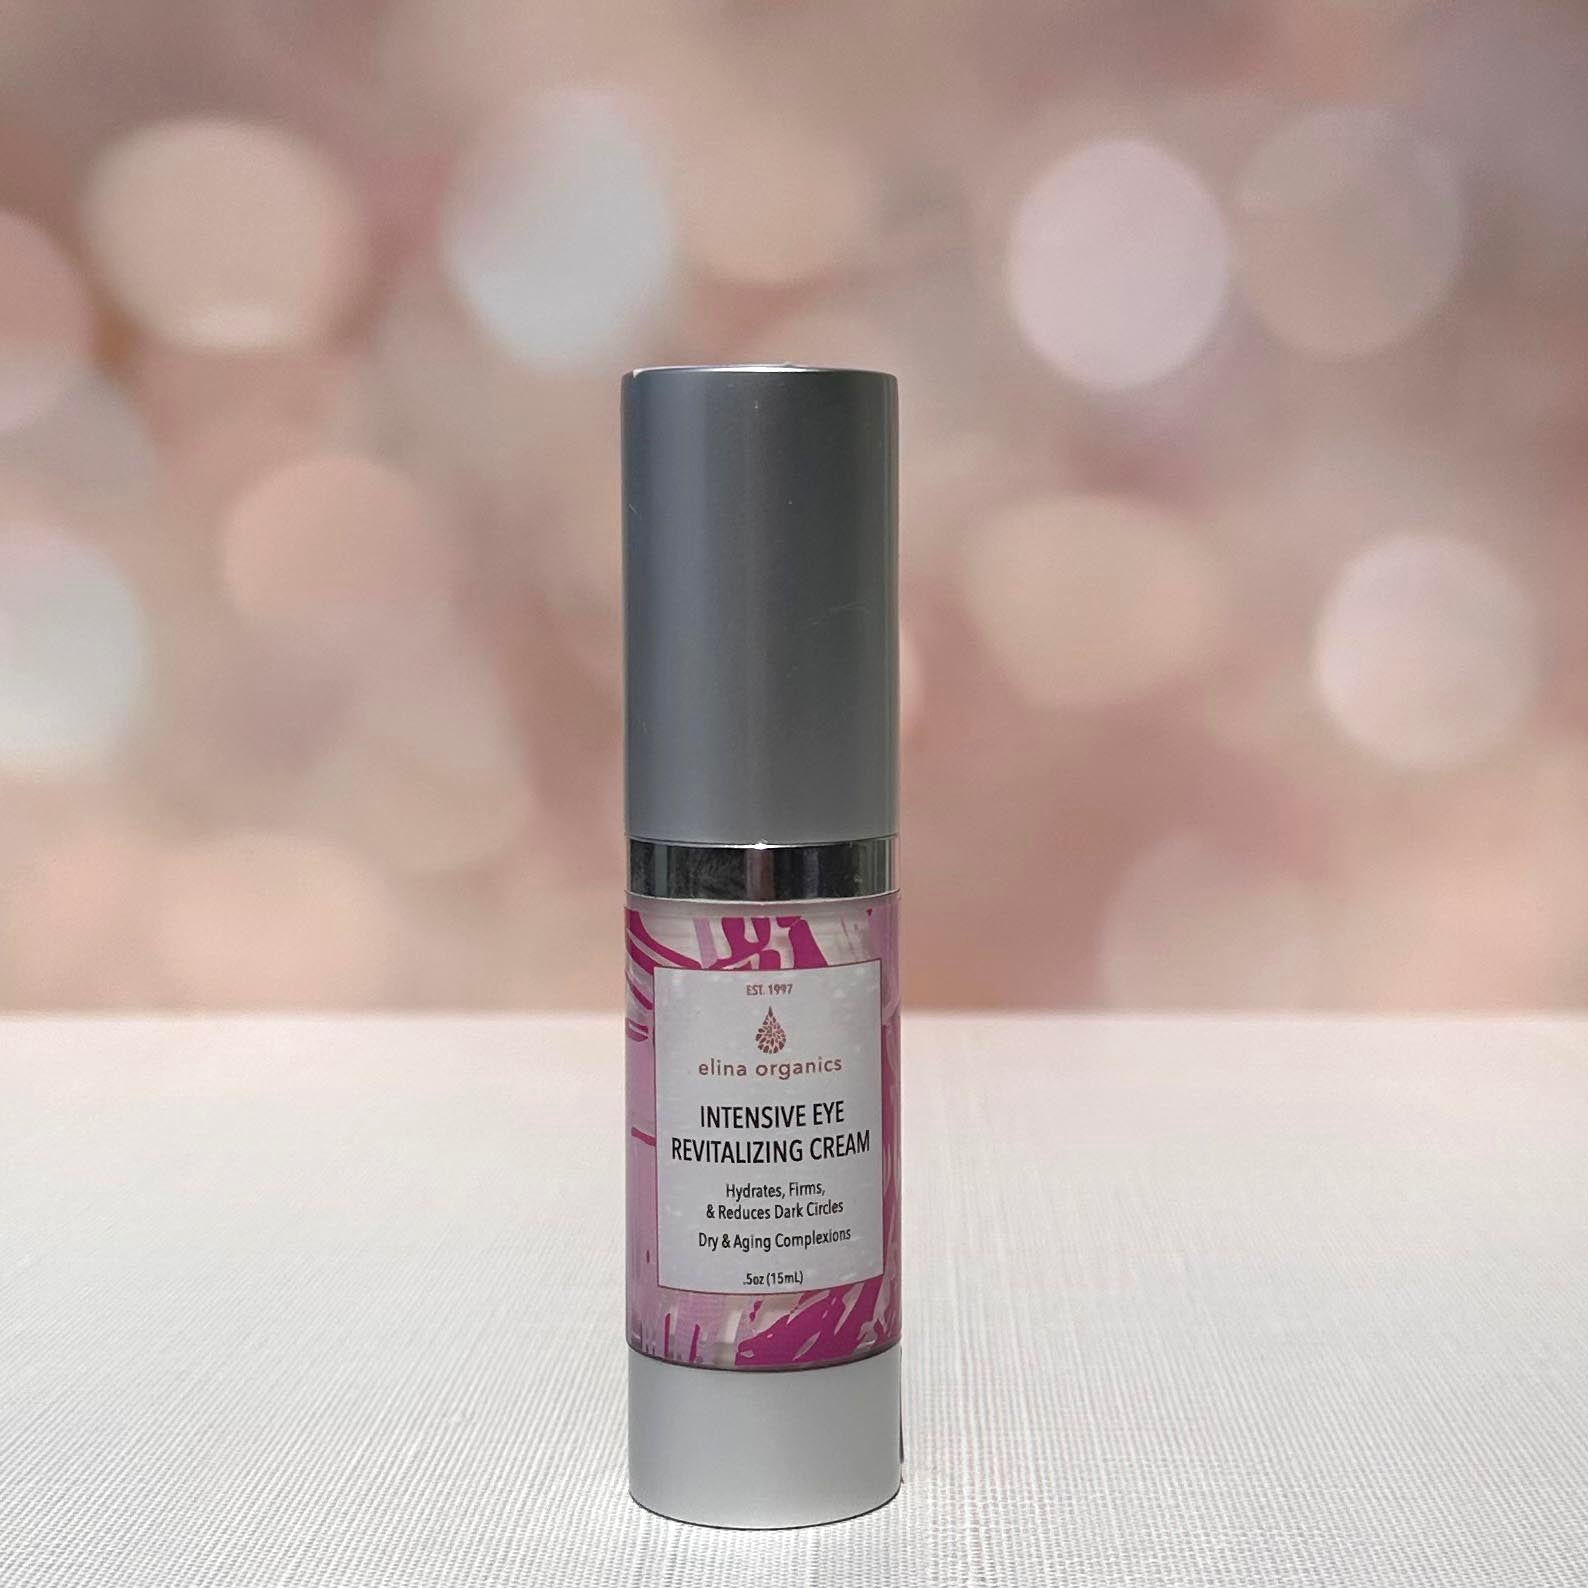 Elina Organics' Intensive Eye Revitalizing Cream with a sparkly background